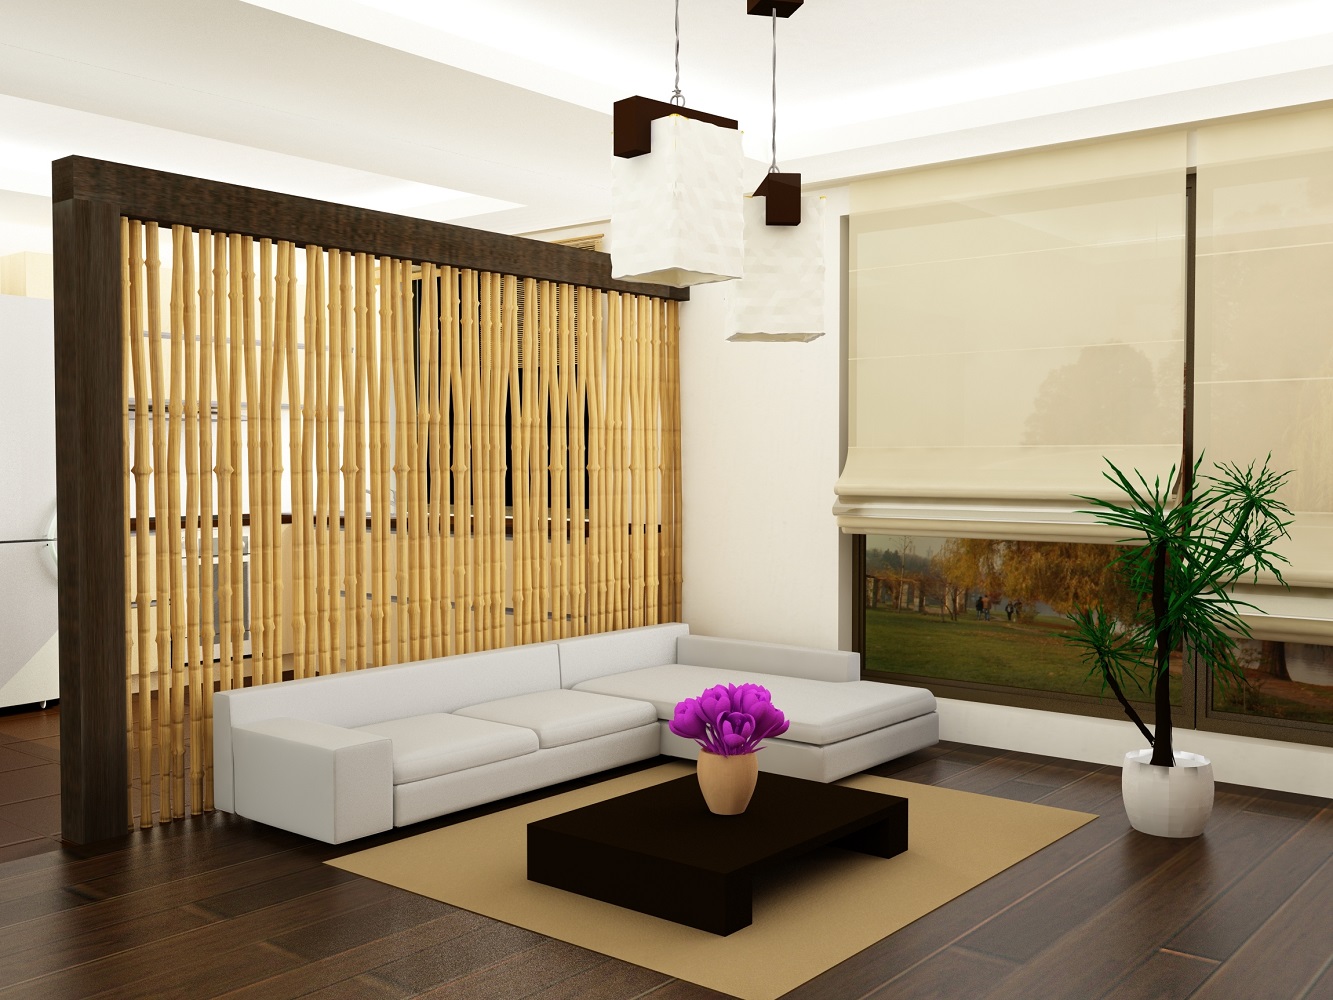 blinds with bamboo in a room interior